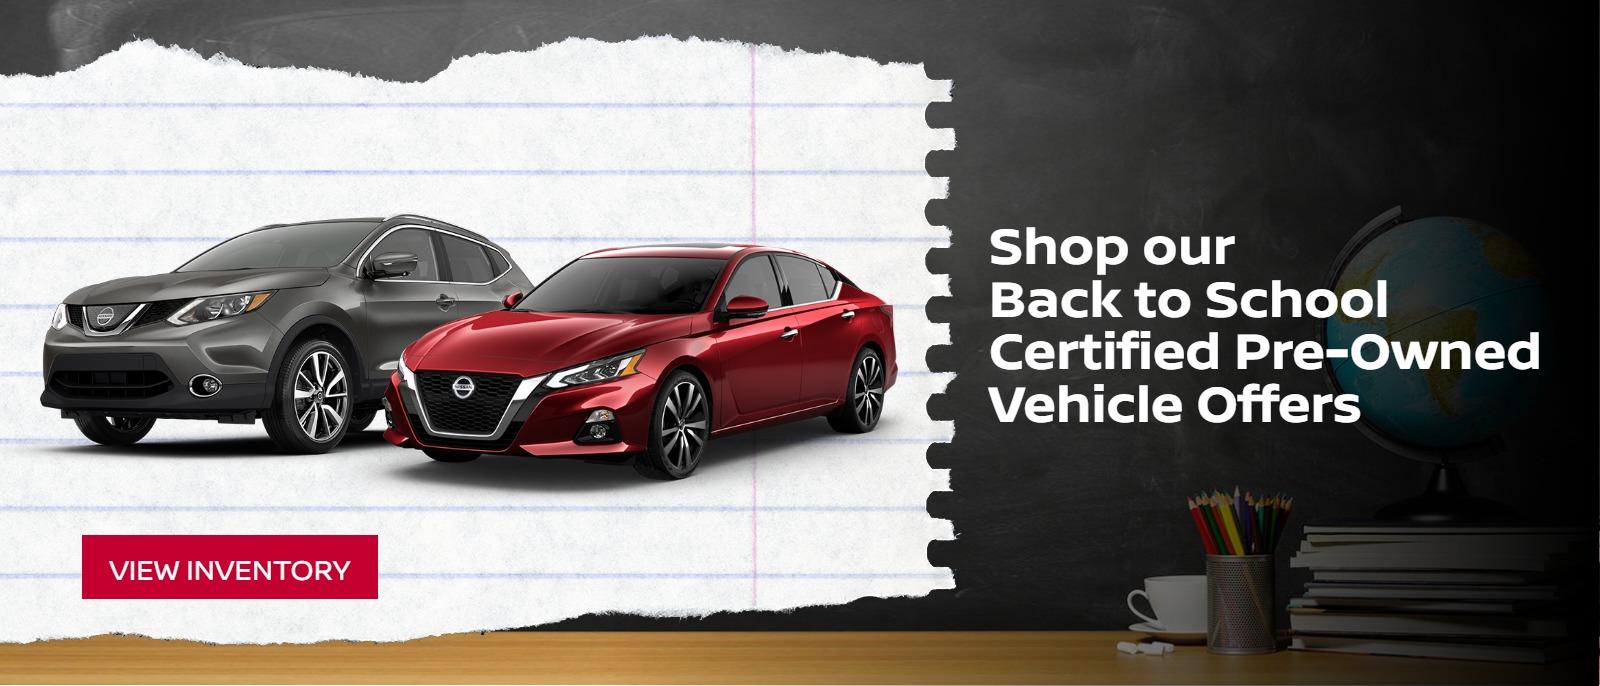 Shop our Back to School Certified Pre-Owned Vehicle Offers